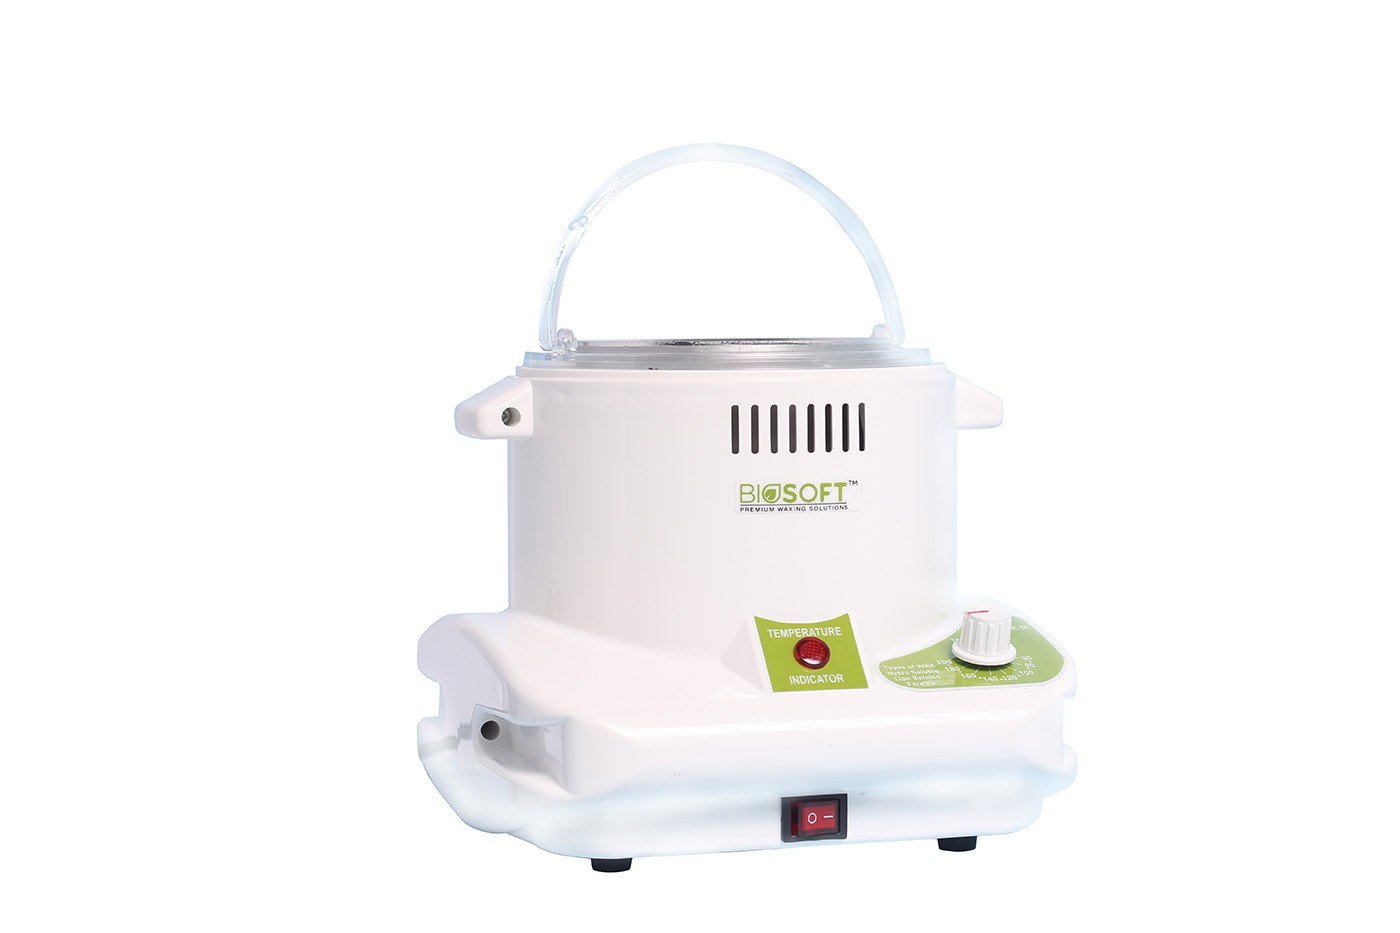 Save time with the Biosoft’s Solo Wax Heater